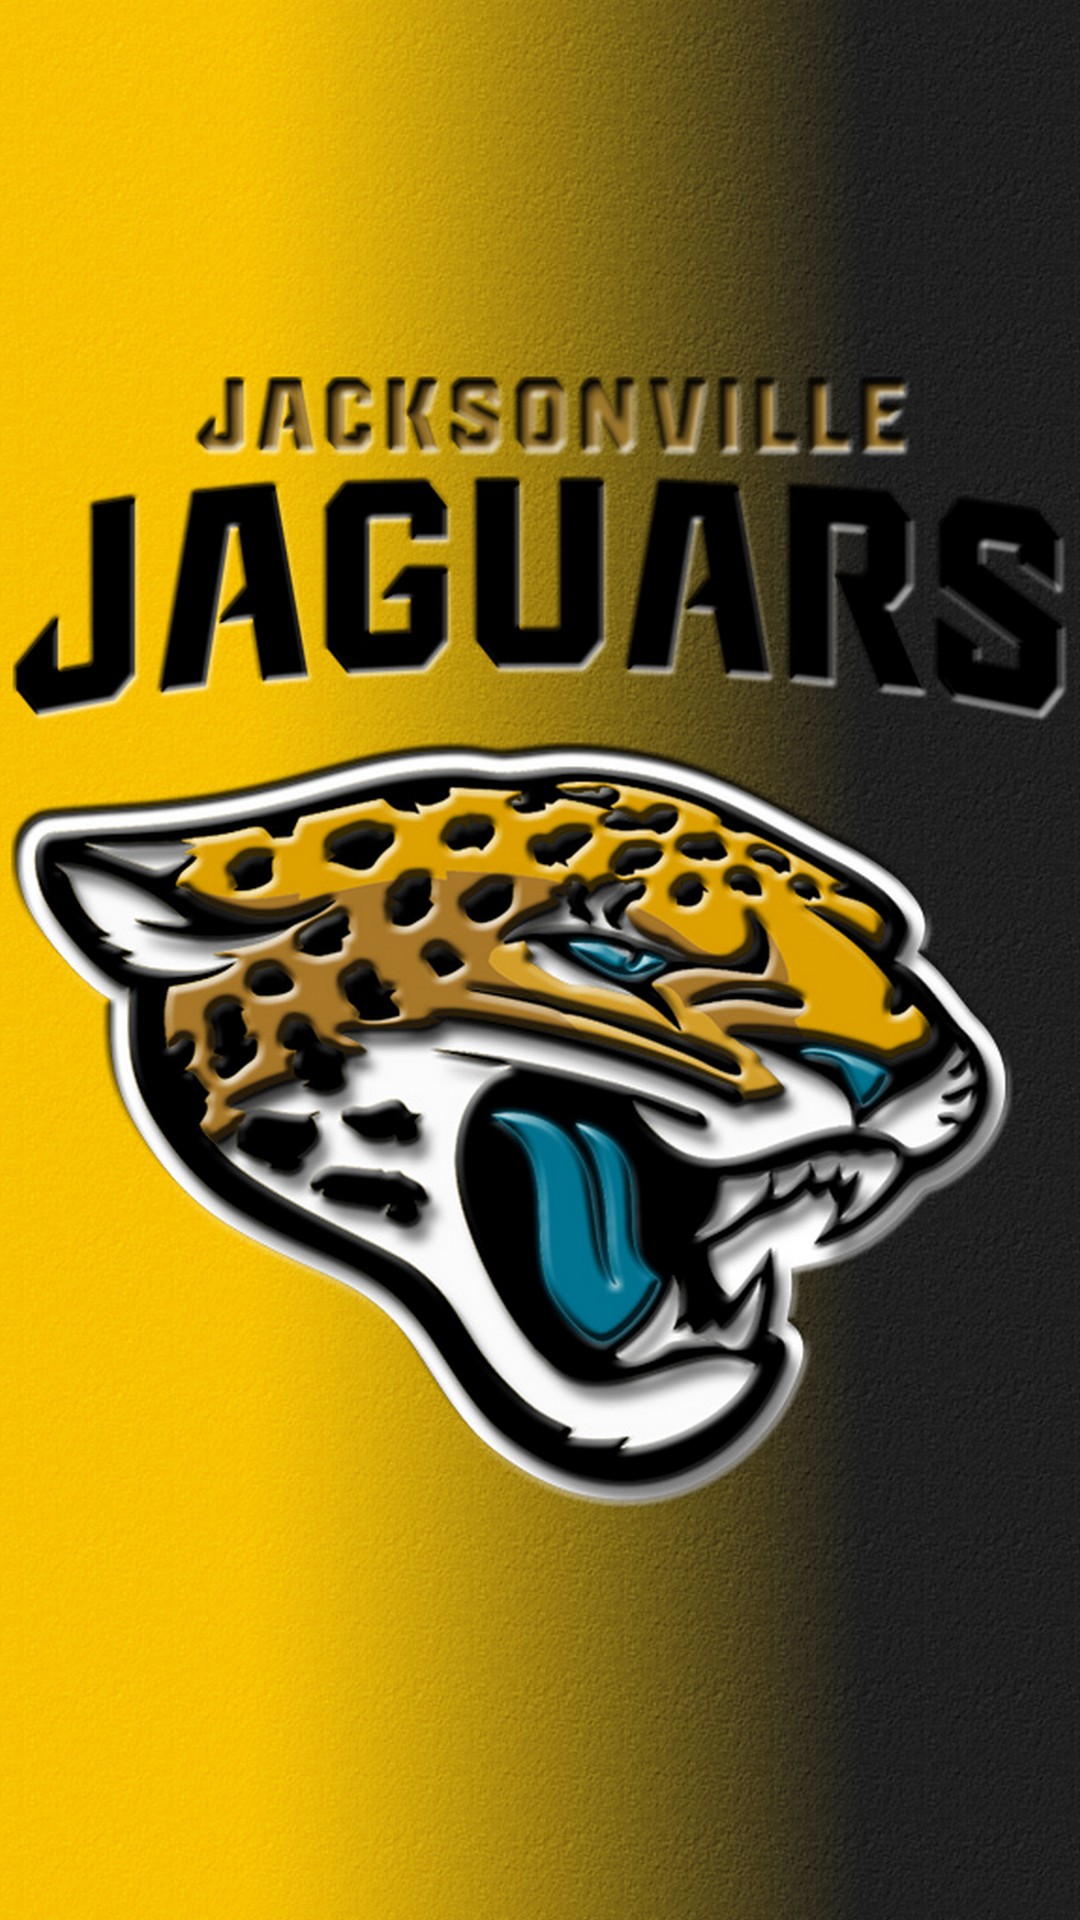 Jacksonville Jaguars HD Wallpaper For iPhone with high-resolution 1080x1920 pixel. You can use this wallpaper for your Mac or Windows Desktop Background, iPhone, Android or Tablet and another Smartphone device